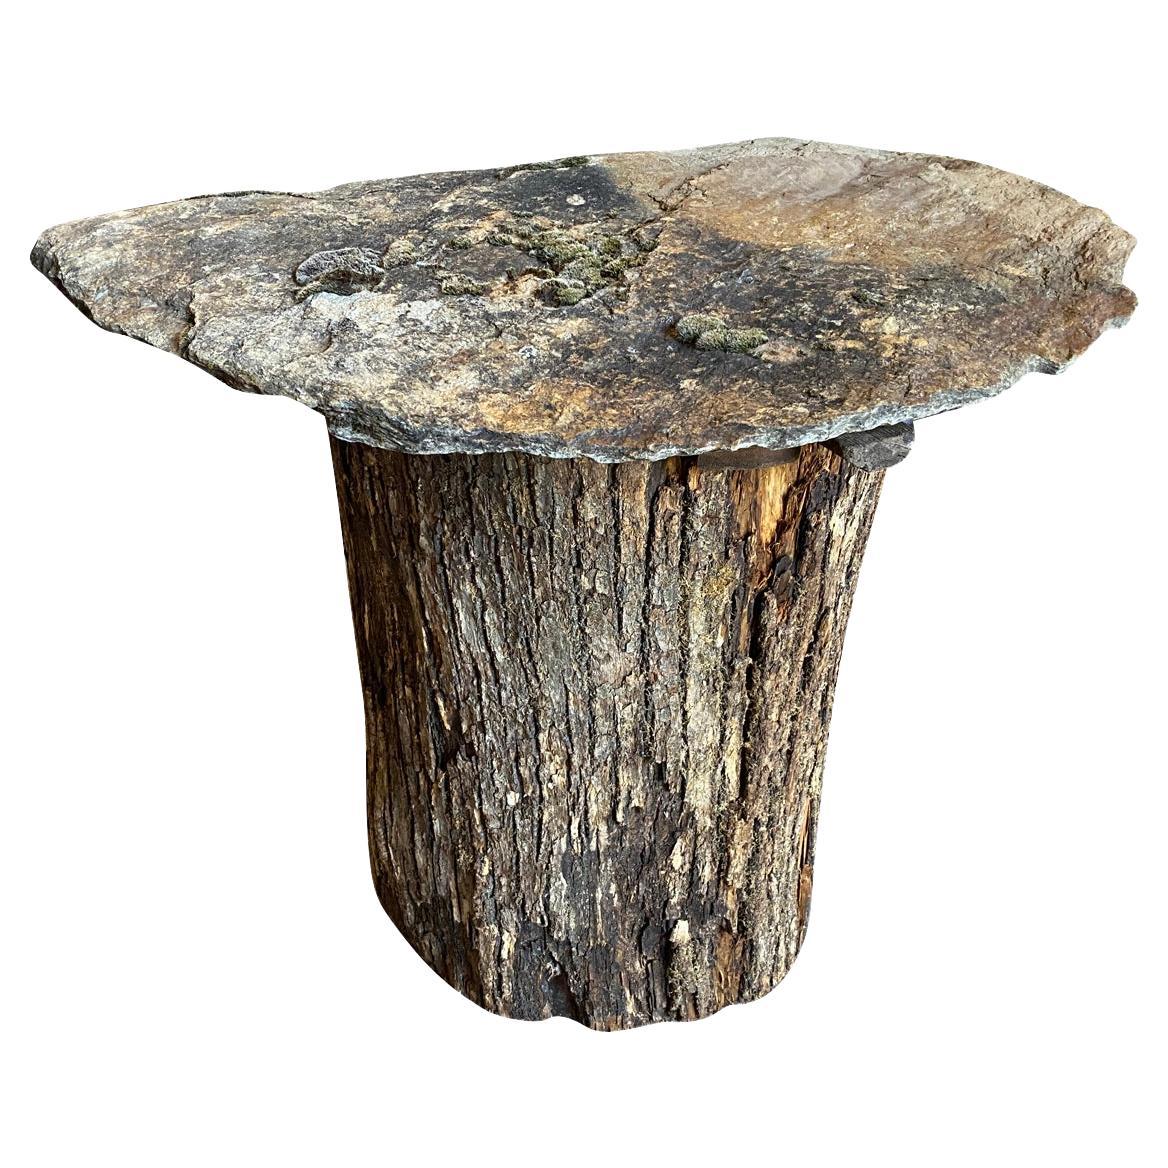 A charming mid-19th century Demi Lune shaped Ruche - Bee Hive with a shale top.  Terrific as a side table.